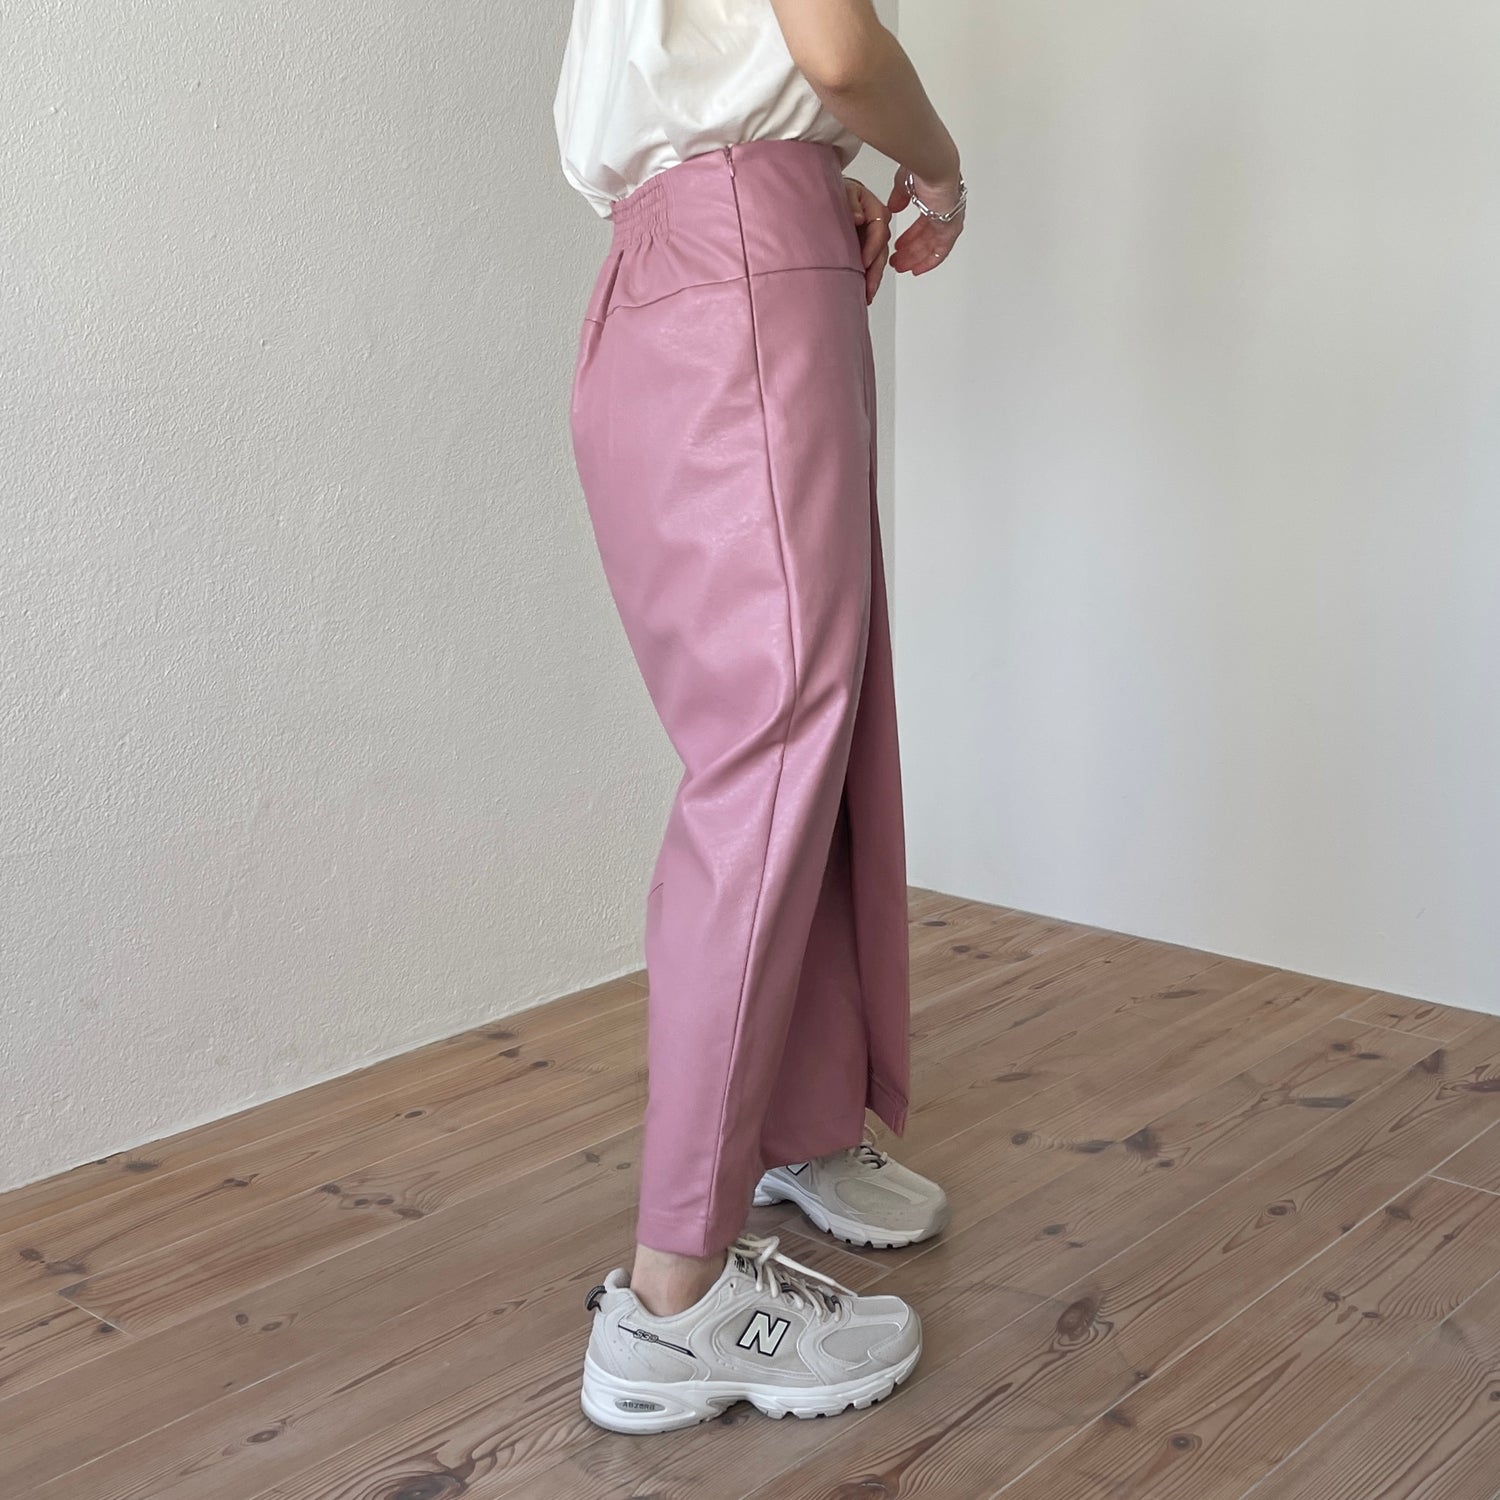 eco leather wrap skirt / pink （エコレザーラップスカート） | wee9s ...